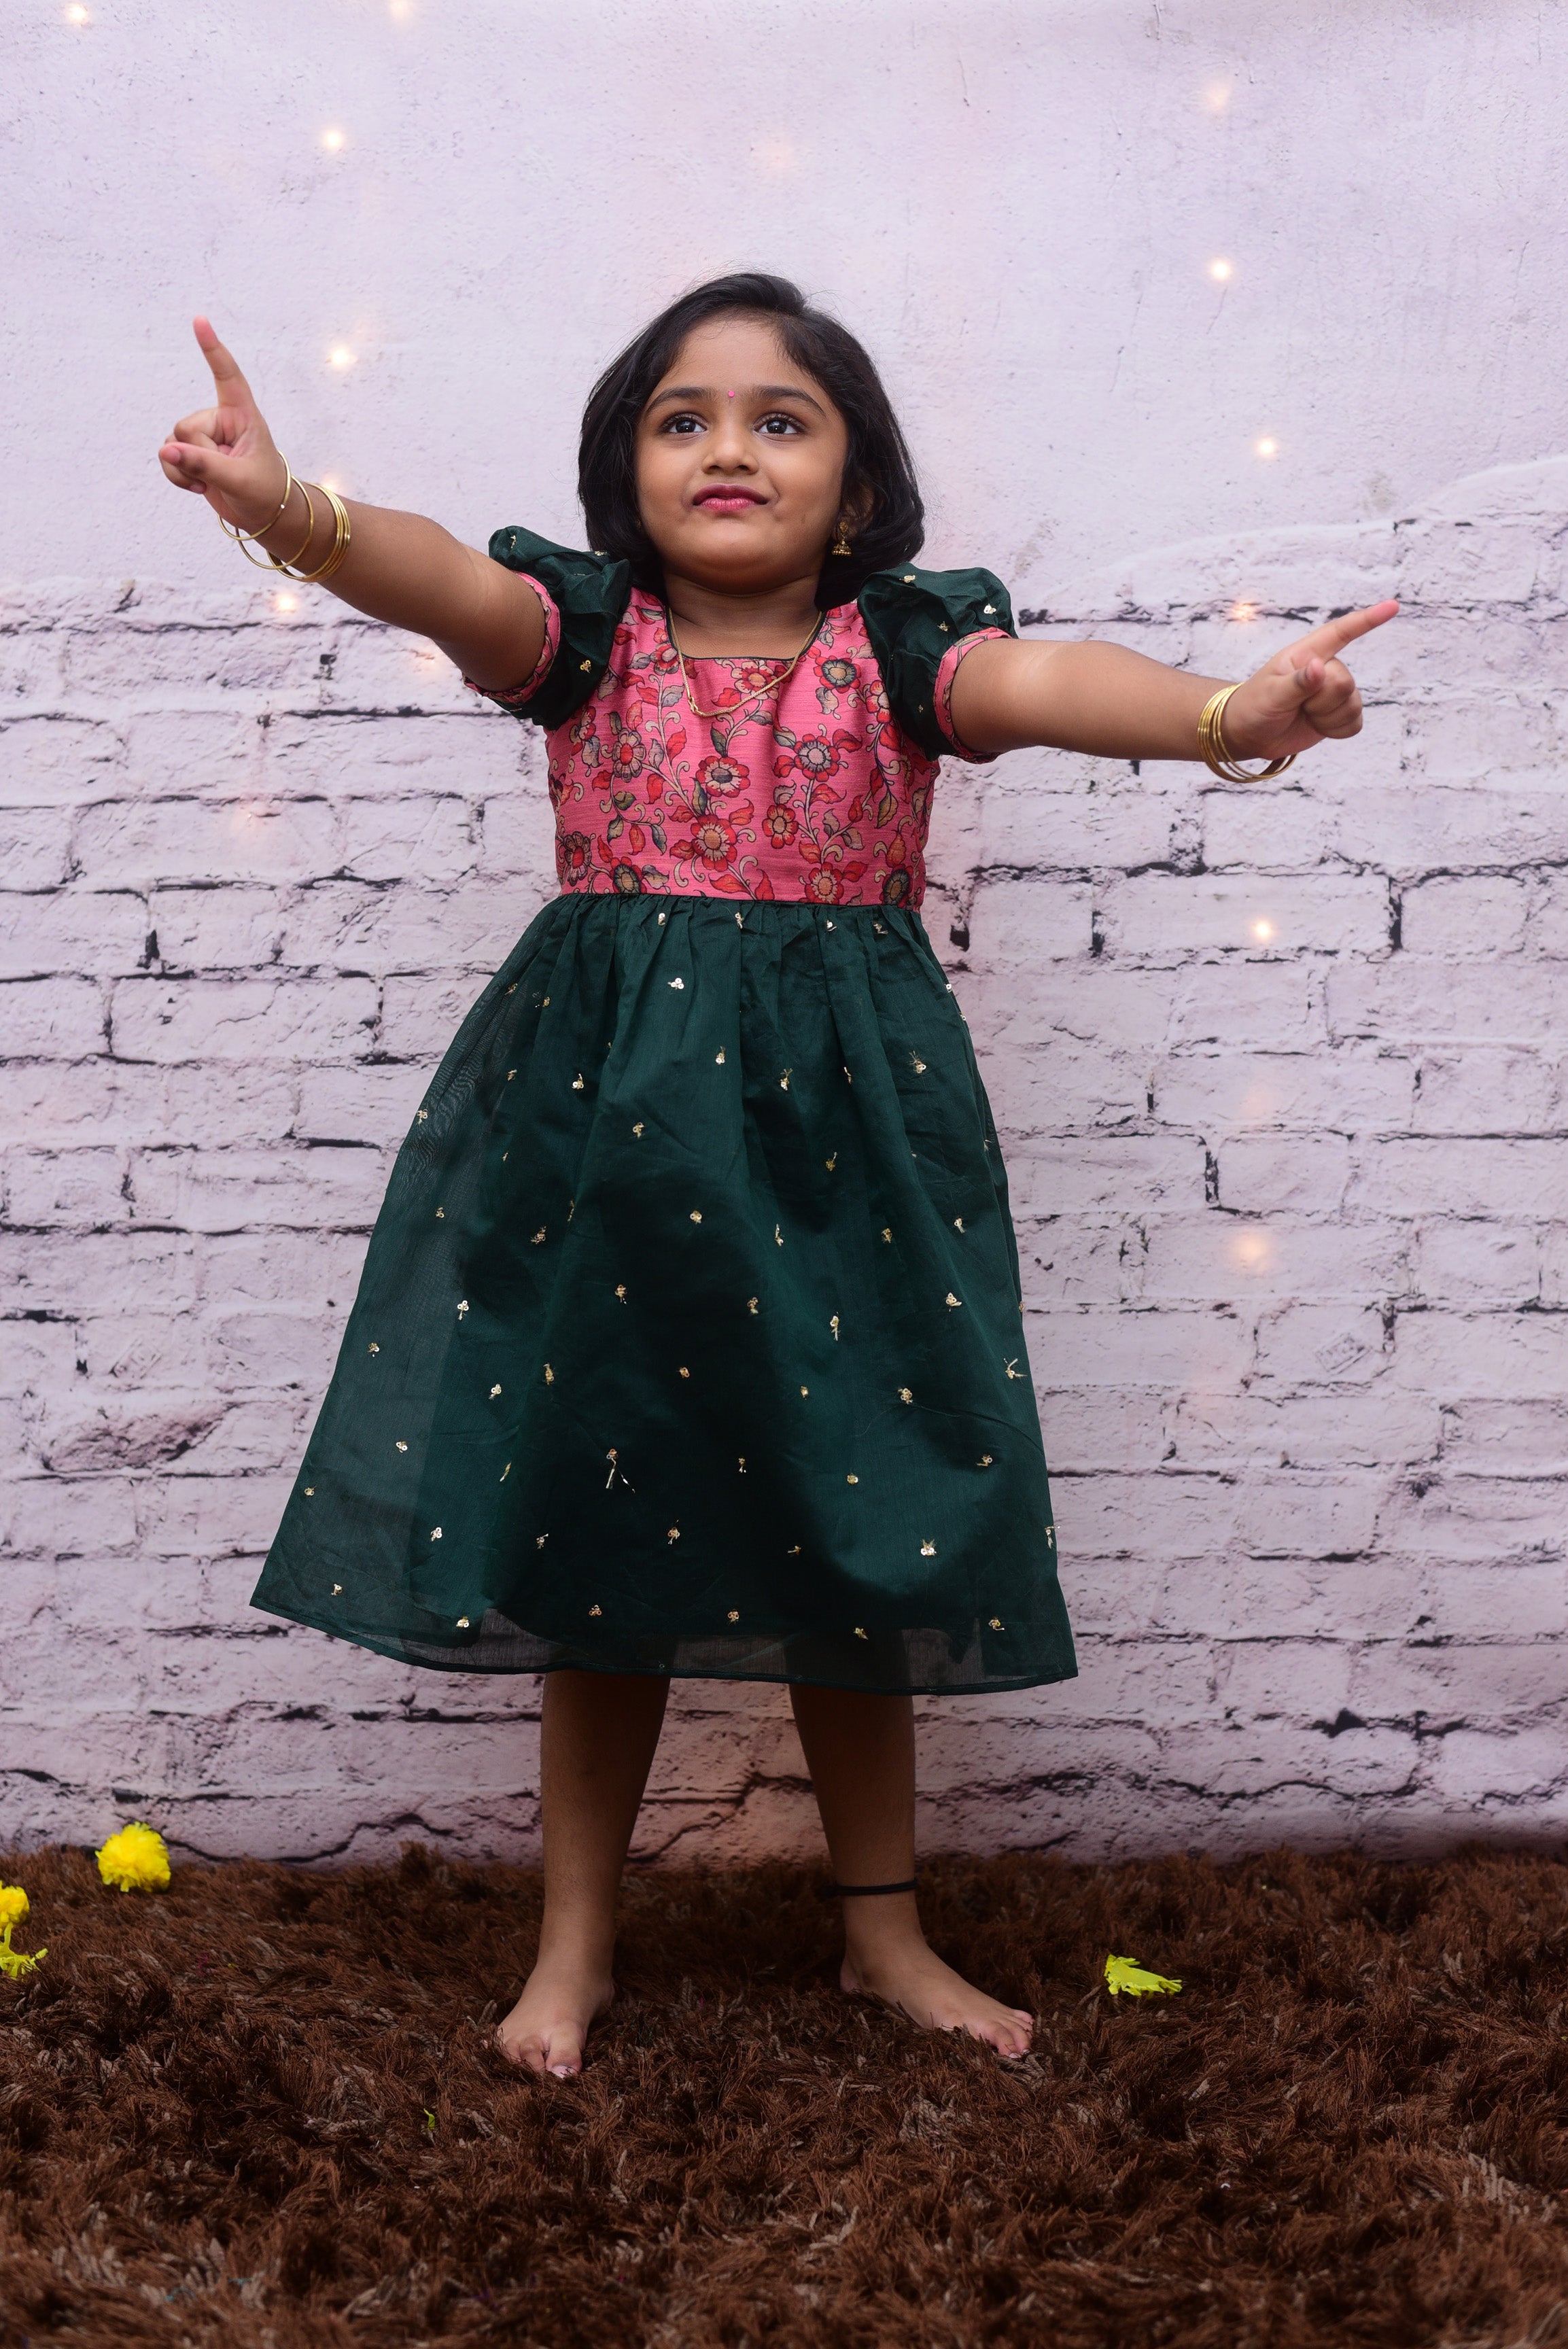 Shop for trendy green sequin frocks, gowns and dresses for baby girls and kids online. Find a gorgeous collection of ethnic short designer frocks, party dresses and new born outfits for your little princess.